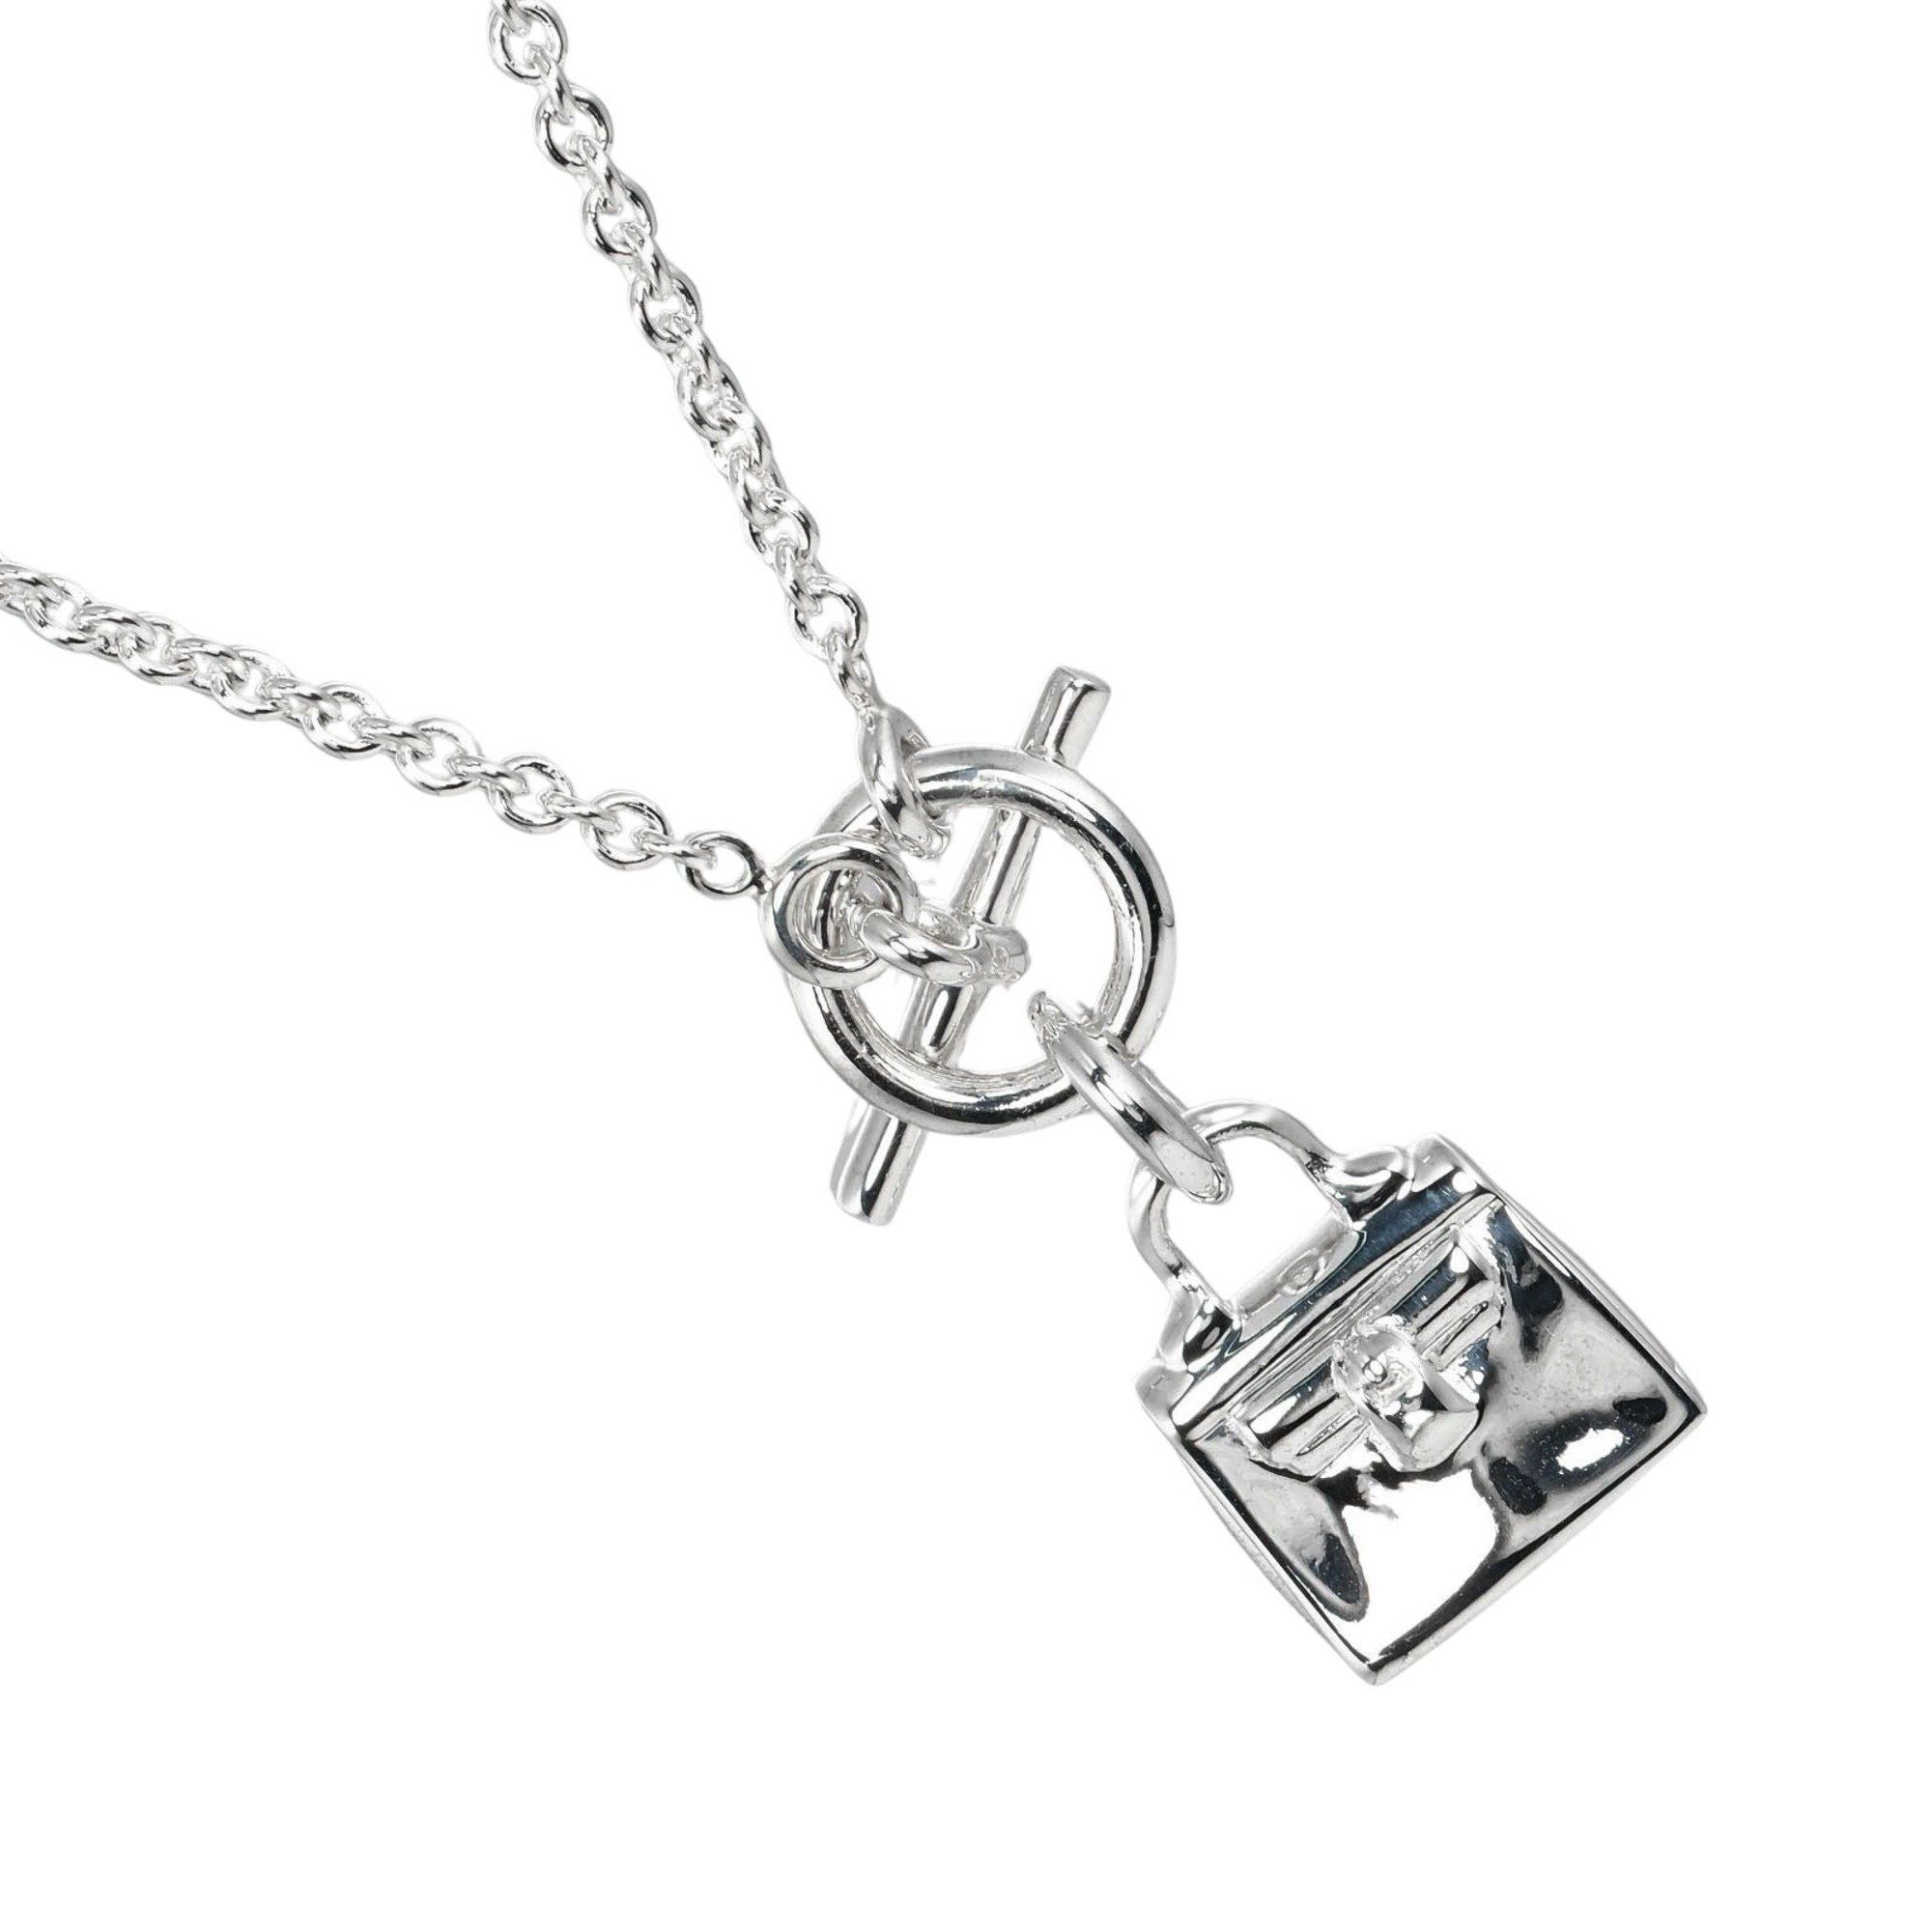 image of Hermes Amulet Kelly Necklace Silver 925 Approx. 12.5G T121724511, Women's